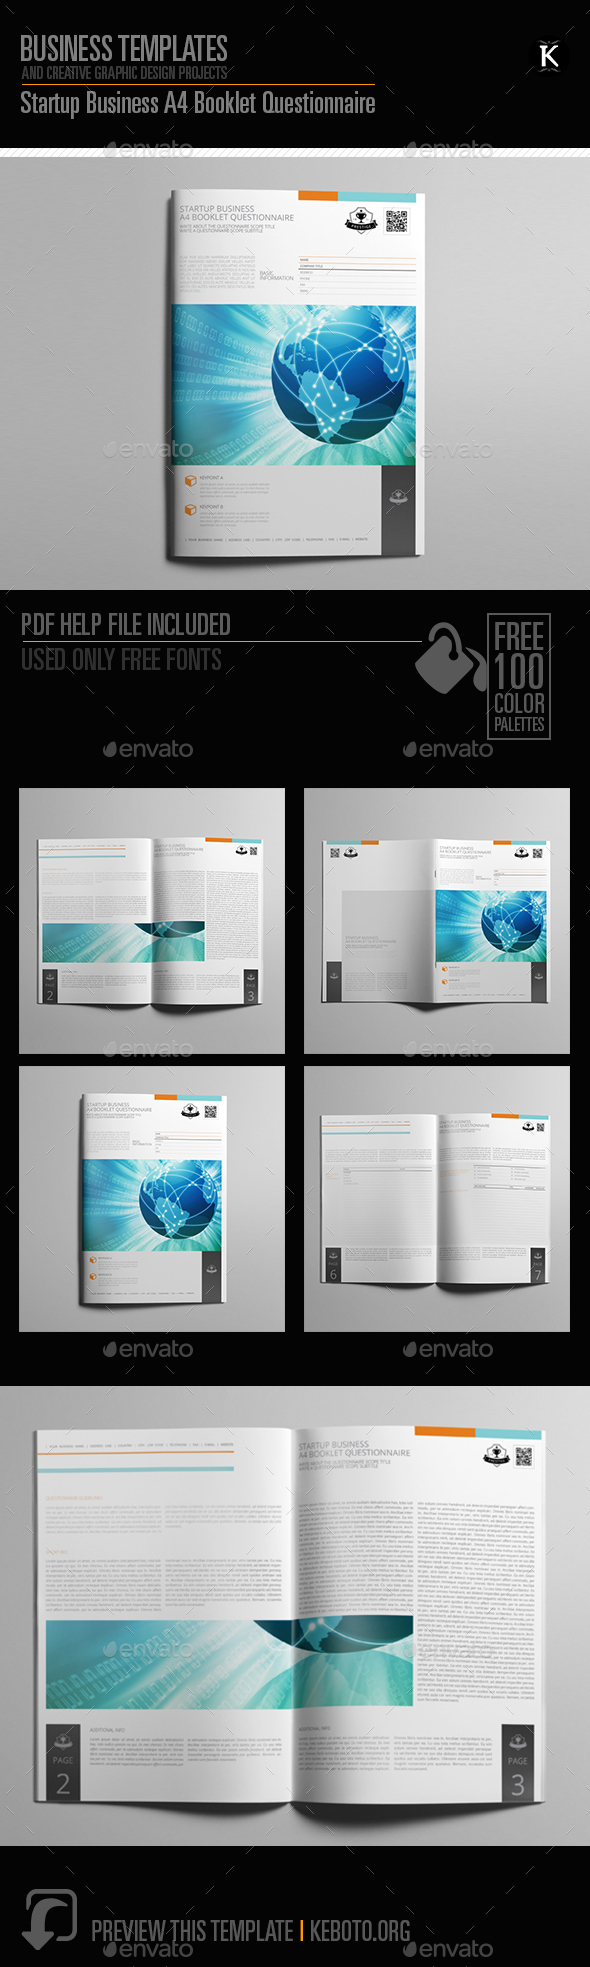 GraphicRiver Startup Business A4 Booklet Questionnaire 20547102